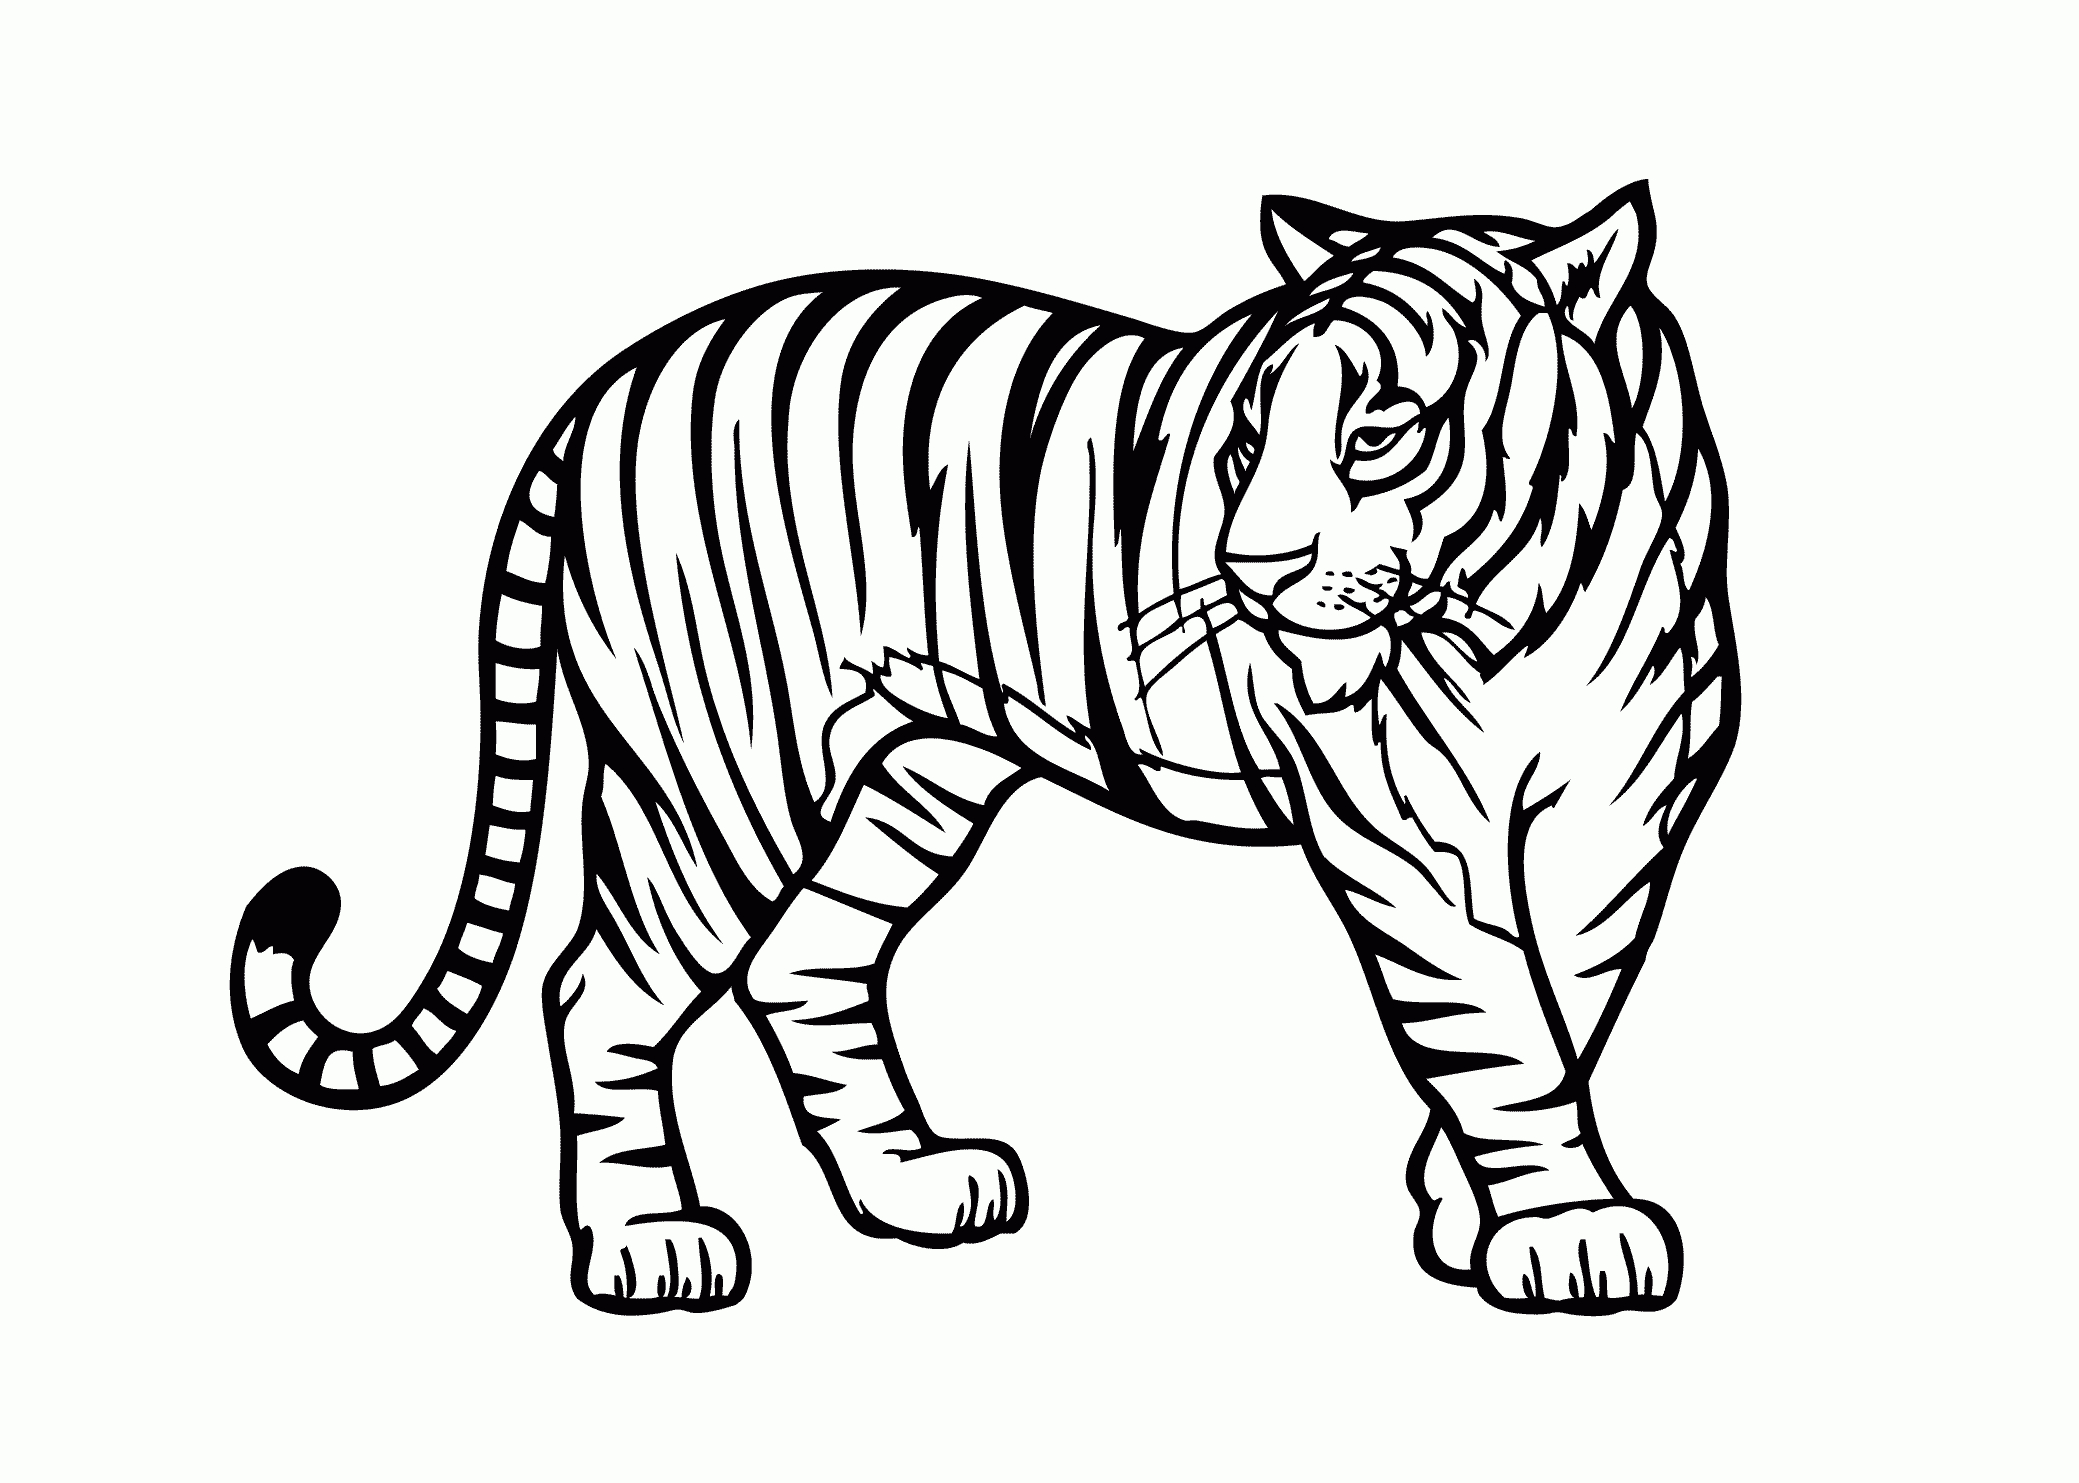 Tiger - Wild Animals Coloring Pages For Kids, Printable Free - Free Printable Wild Animal Coloring Pages